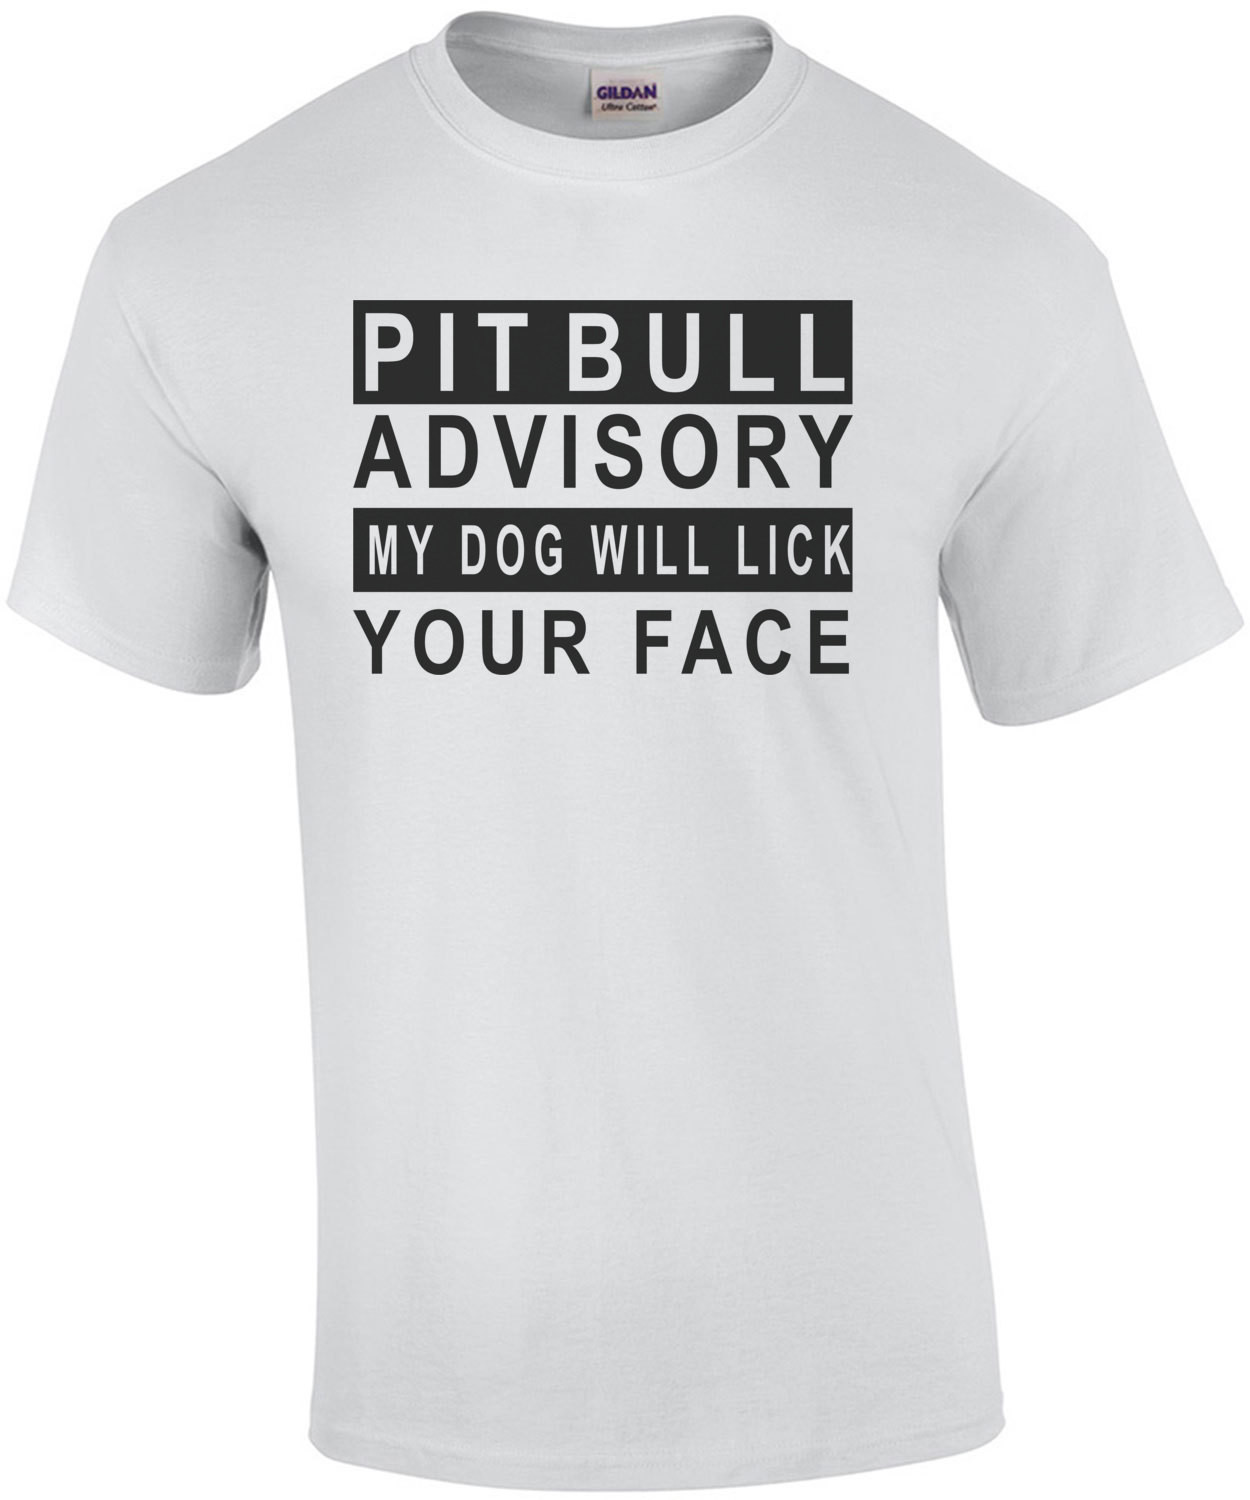 Pit Bull Advisory My Dog Will Lick Your Face - Pit Bull